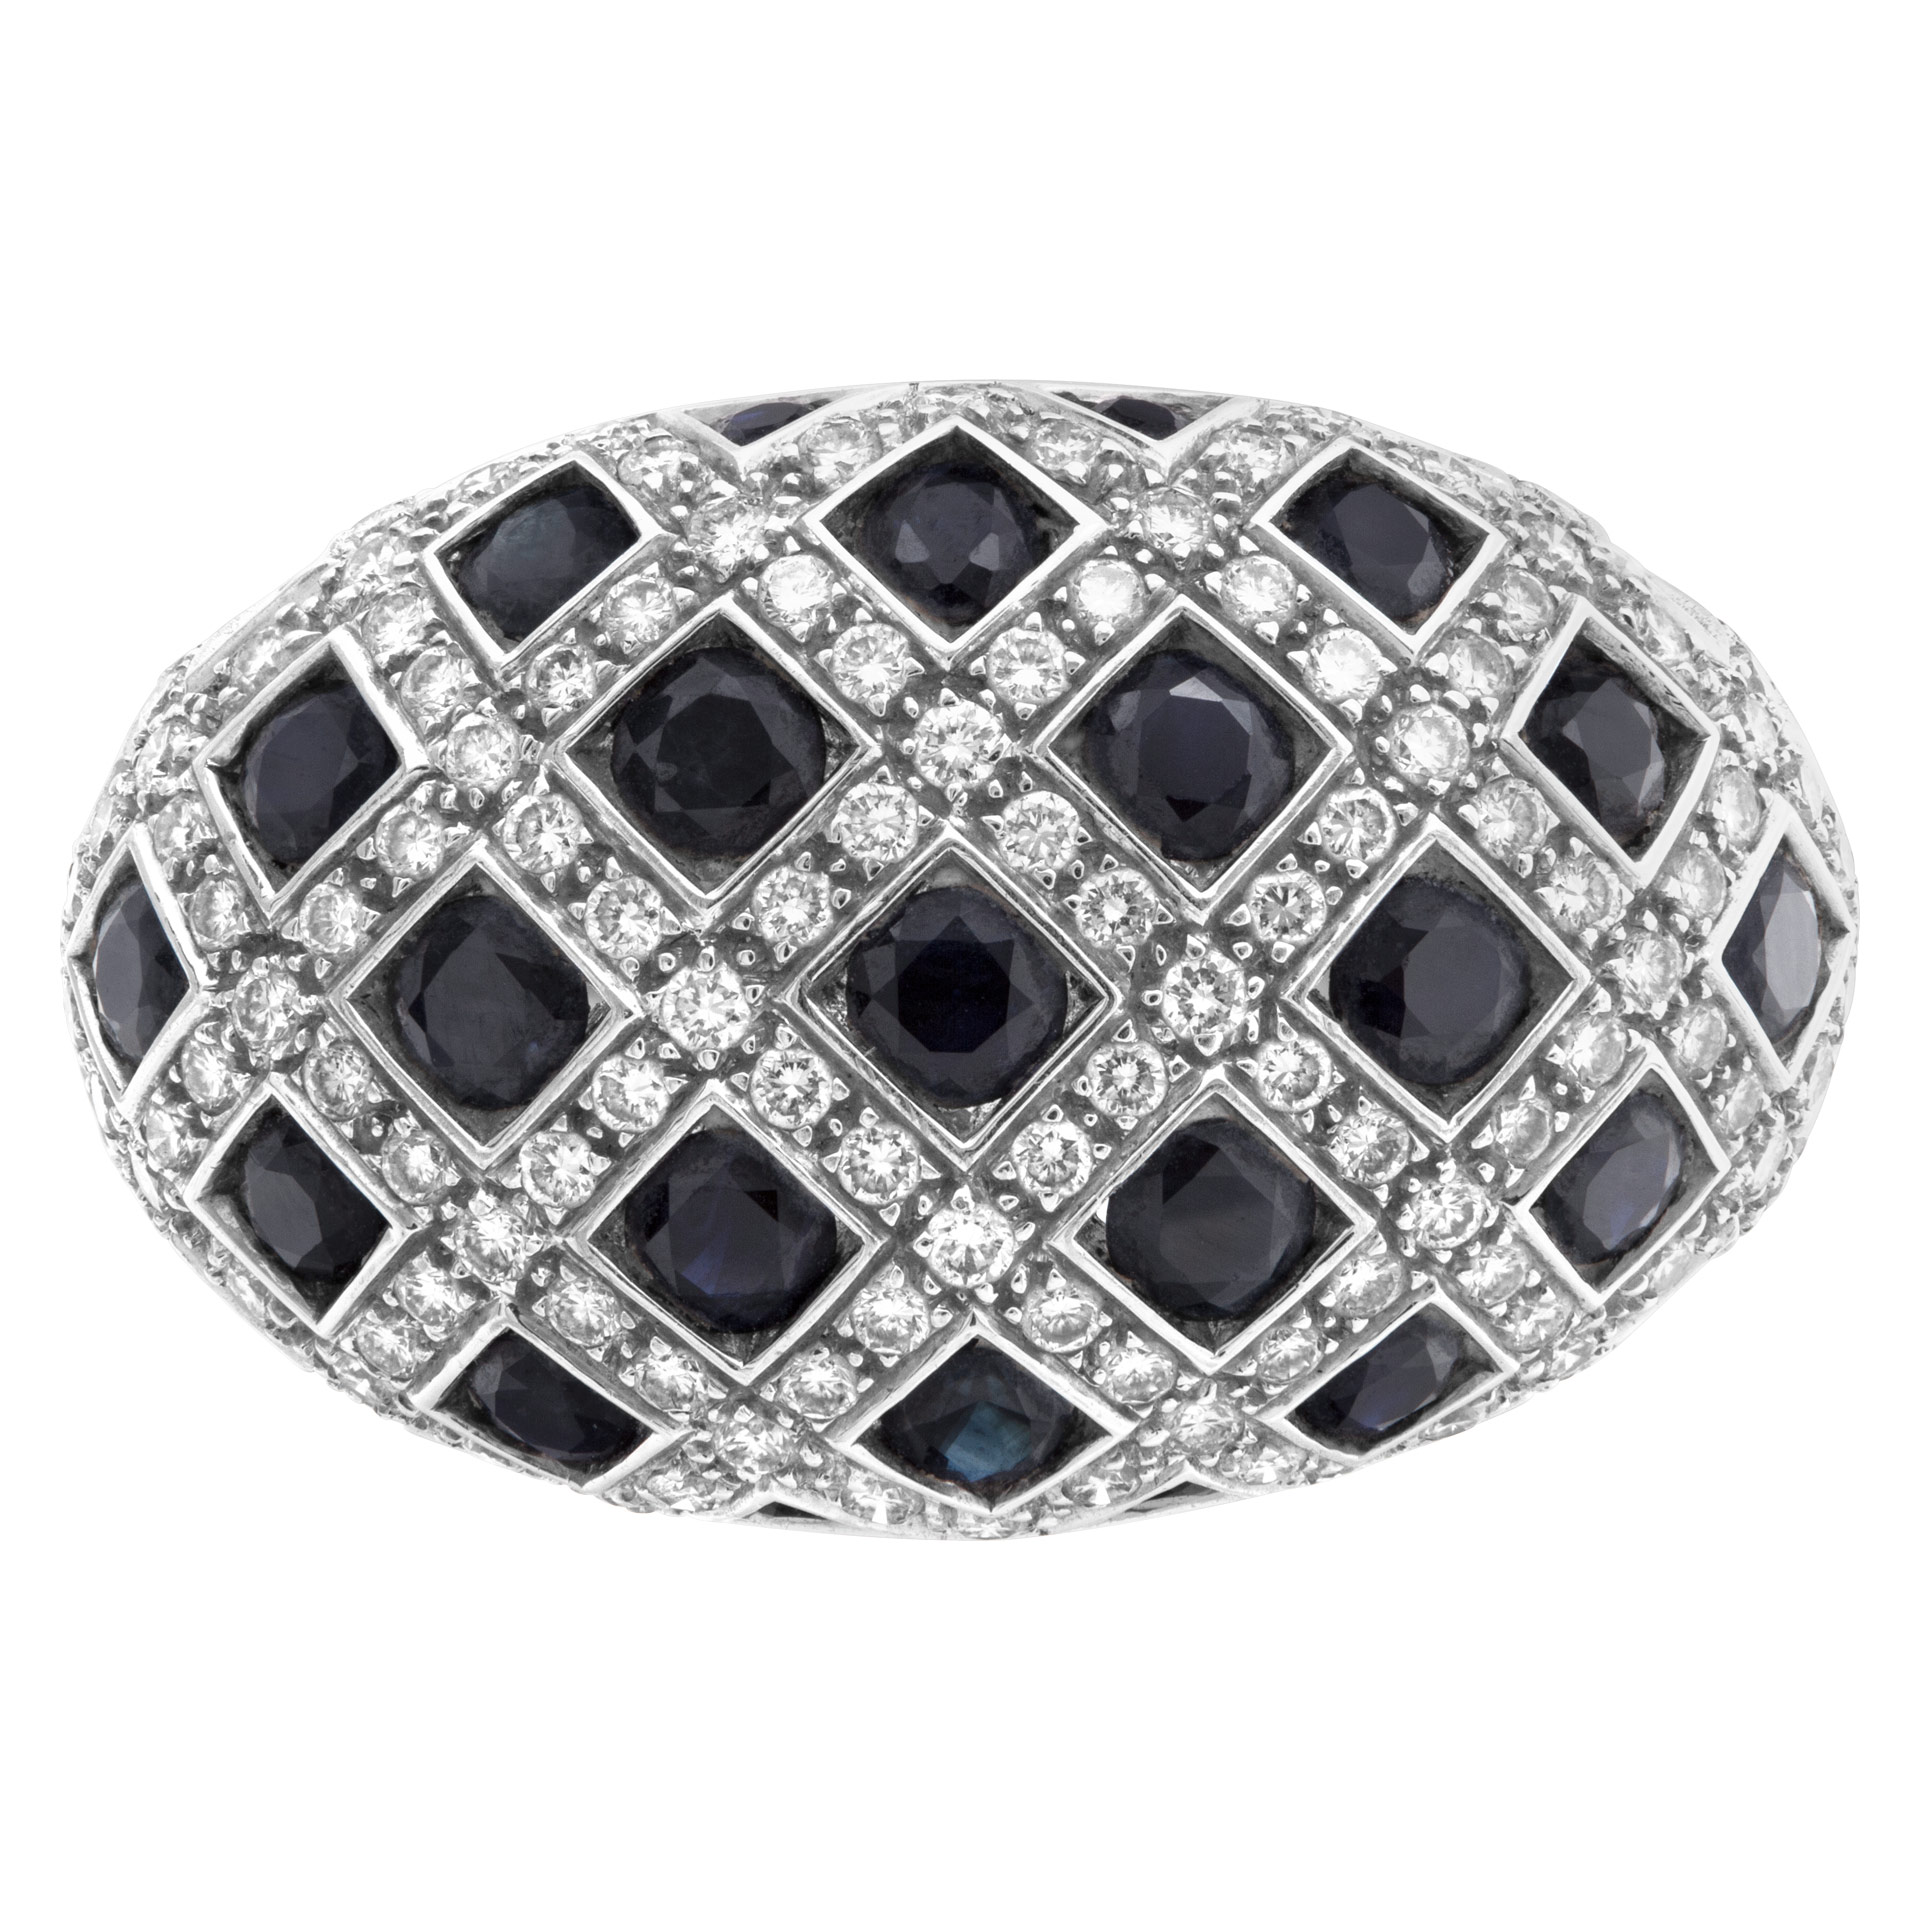 Diamond and sapphire ring in 18k white gold